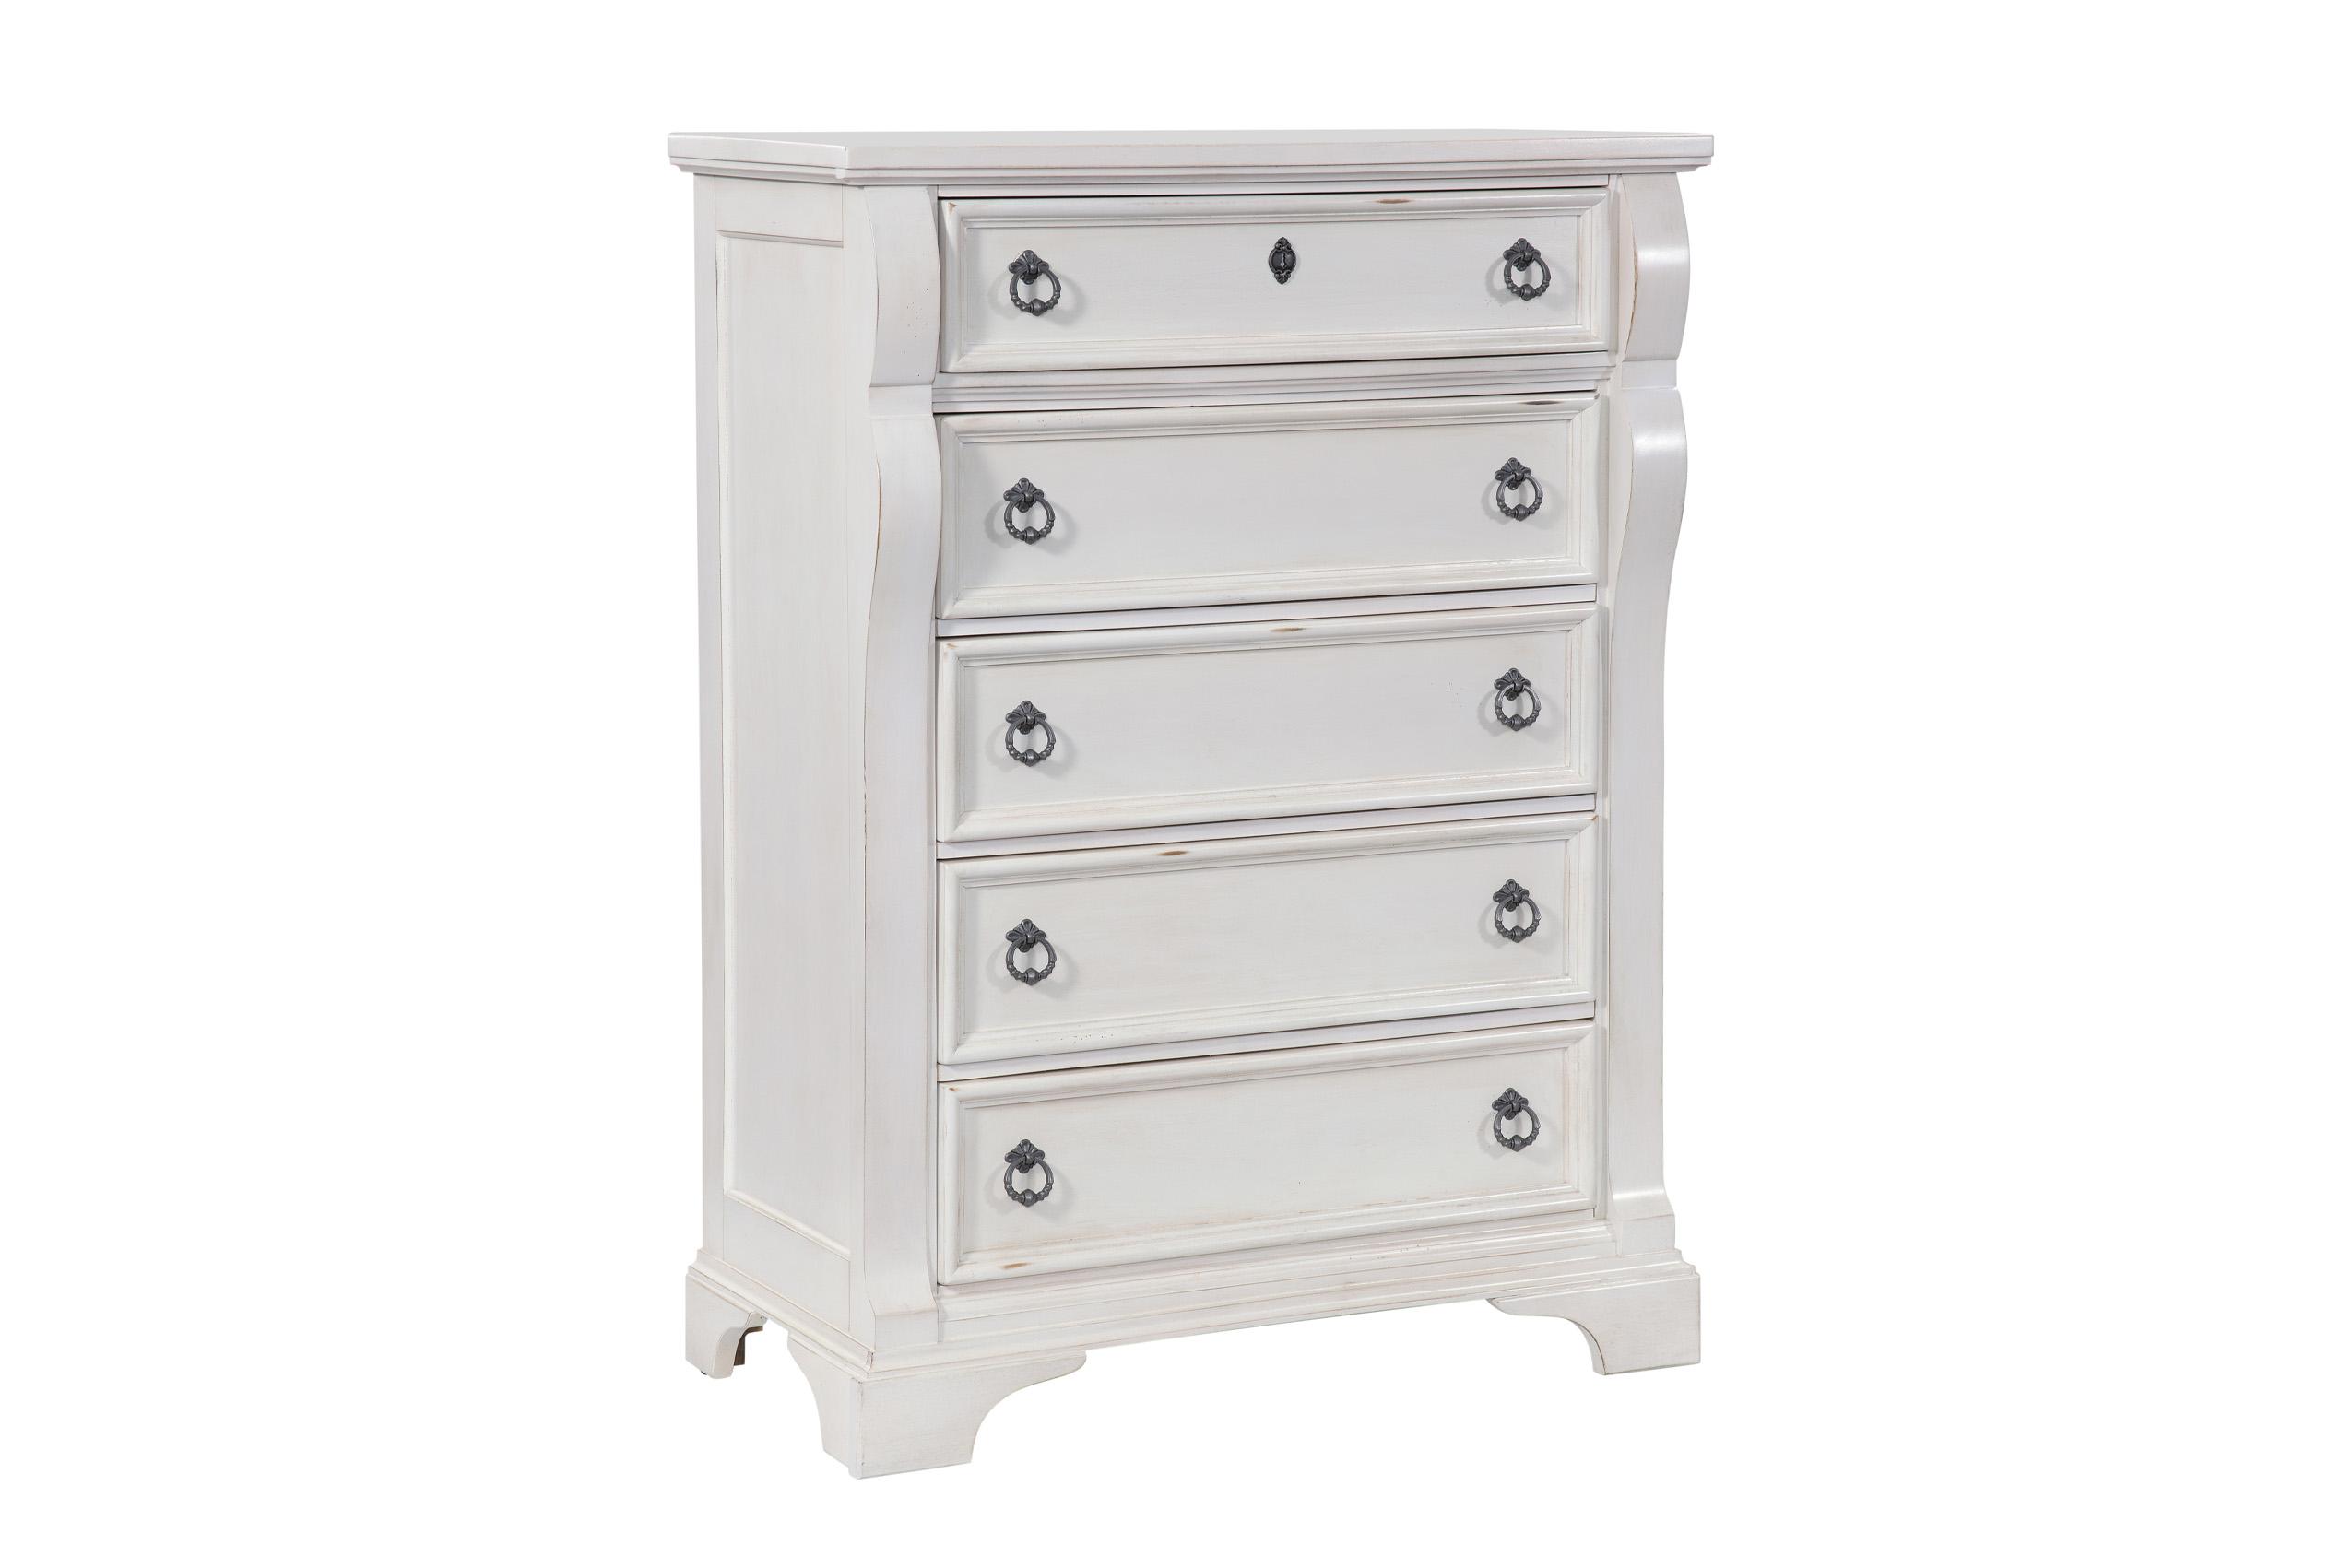 Classic, Traditional, Cottage Chest HEIRLOOM 2910-150 2910-150 in White 